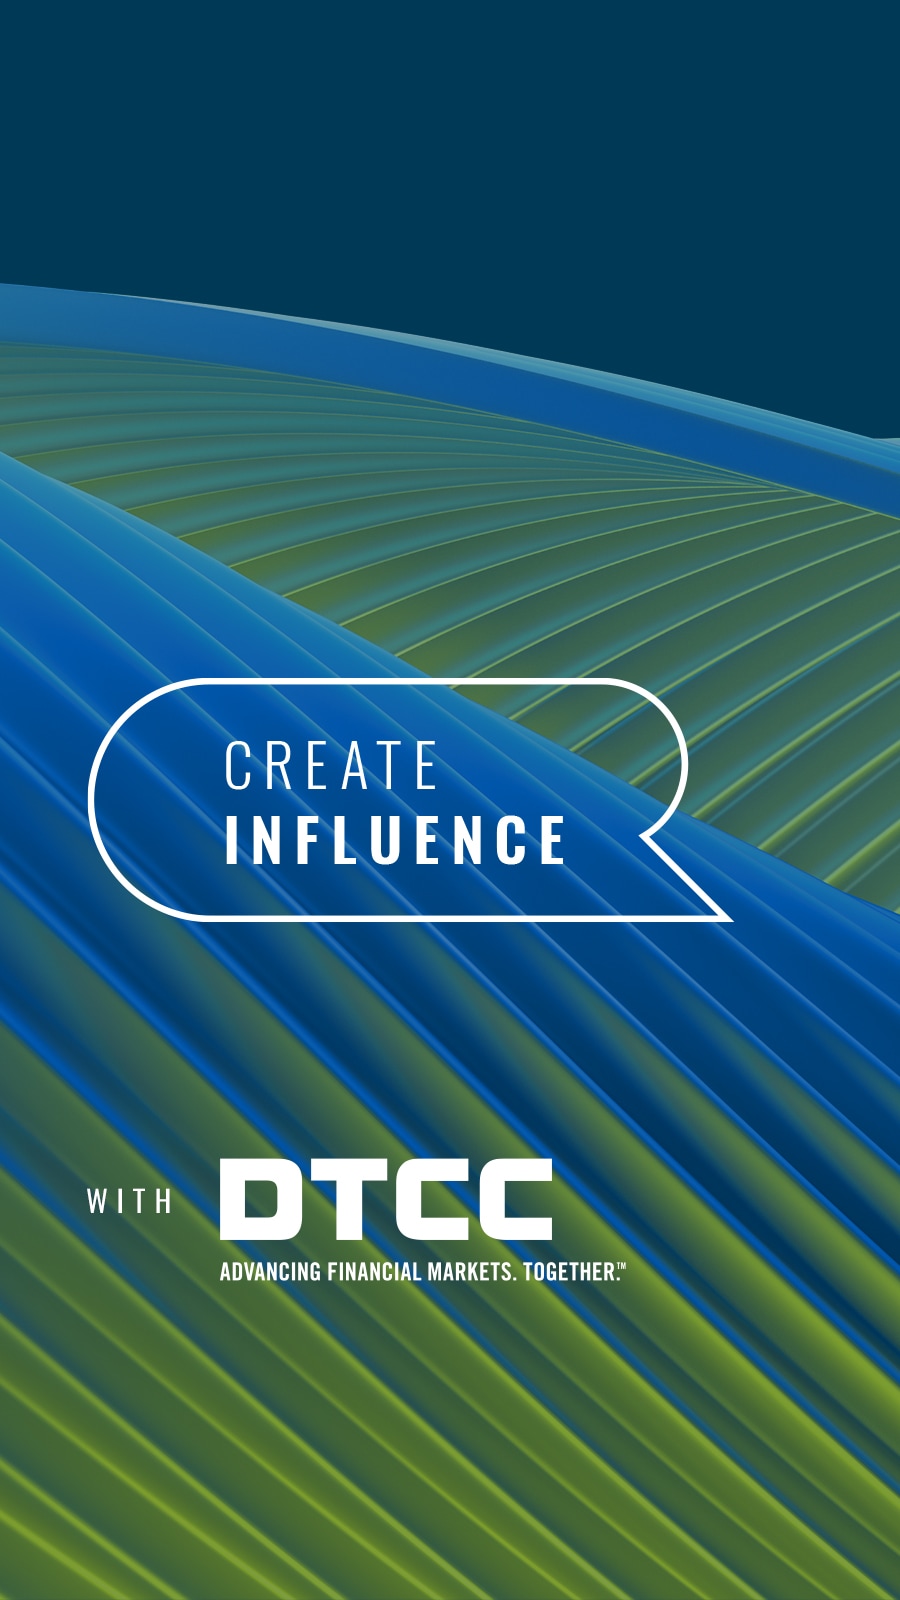 Create Influence with DTCC